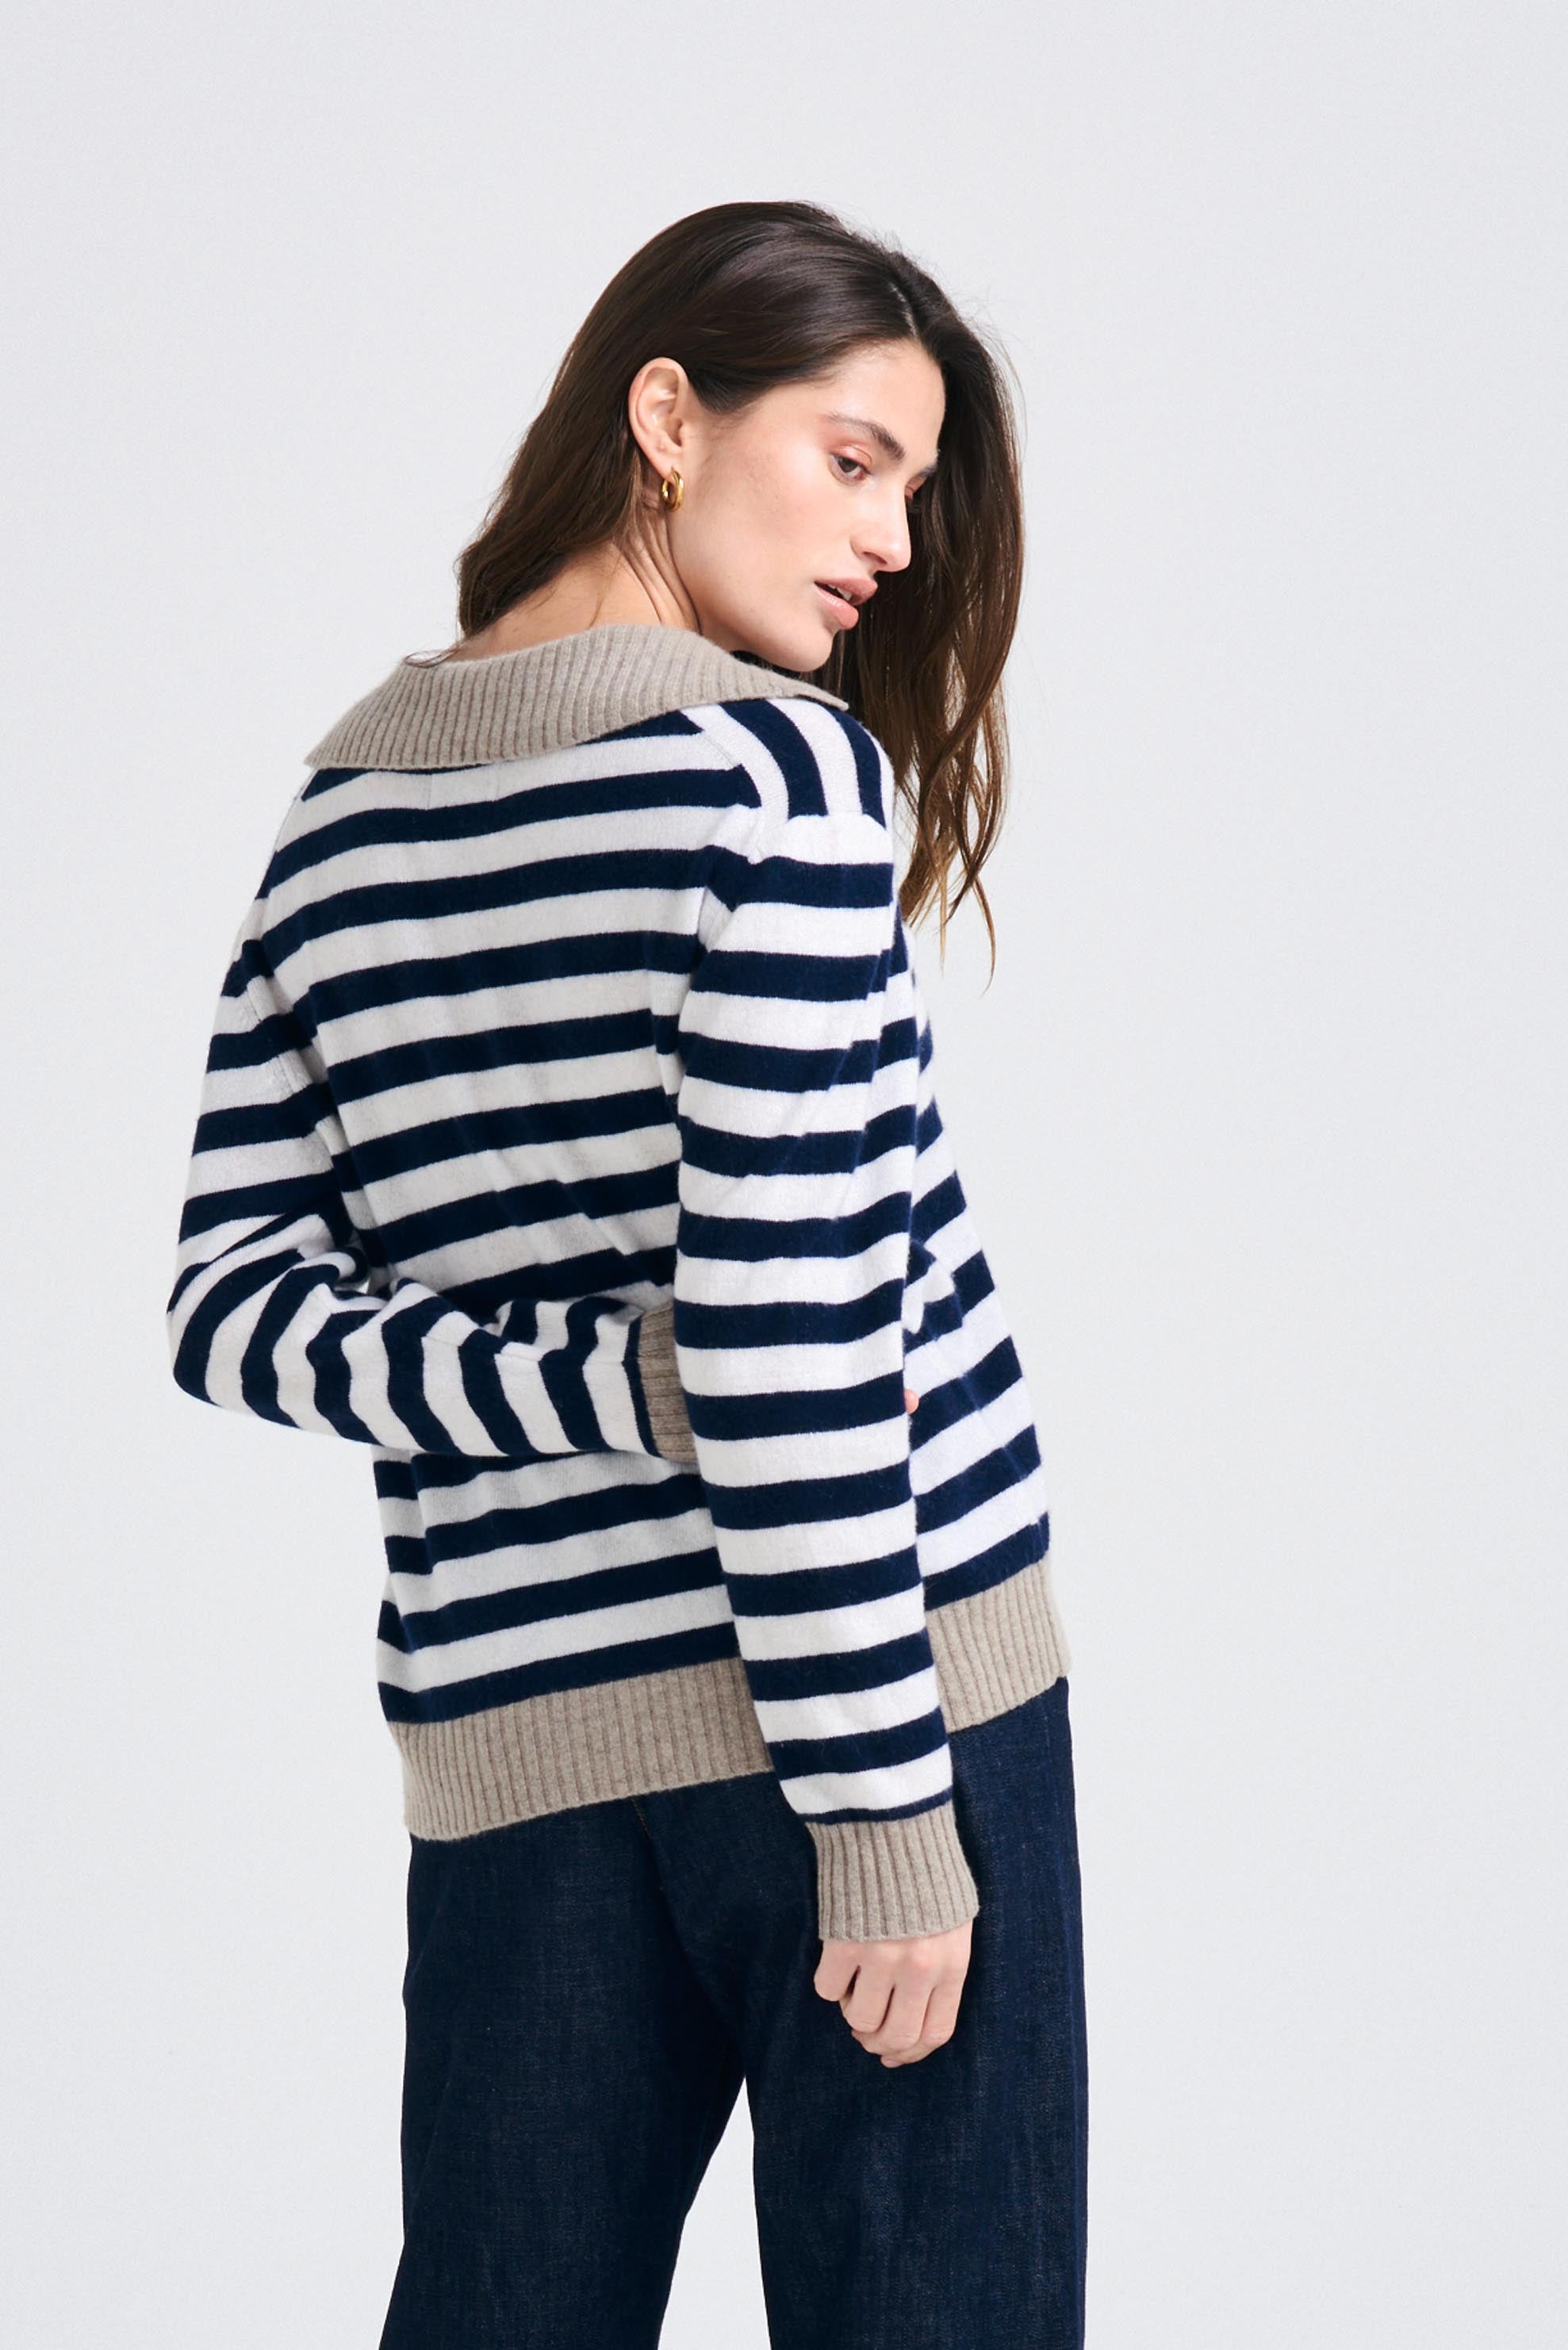 Brown haired female model wearing Jumper1234 Navy and cream stripe cashmere jumper with contrast organic light brown collar and trims facing away from the camera